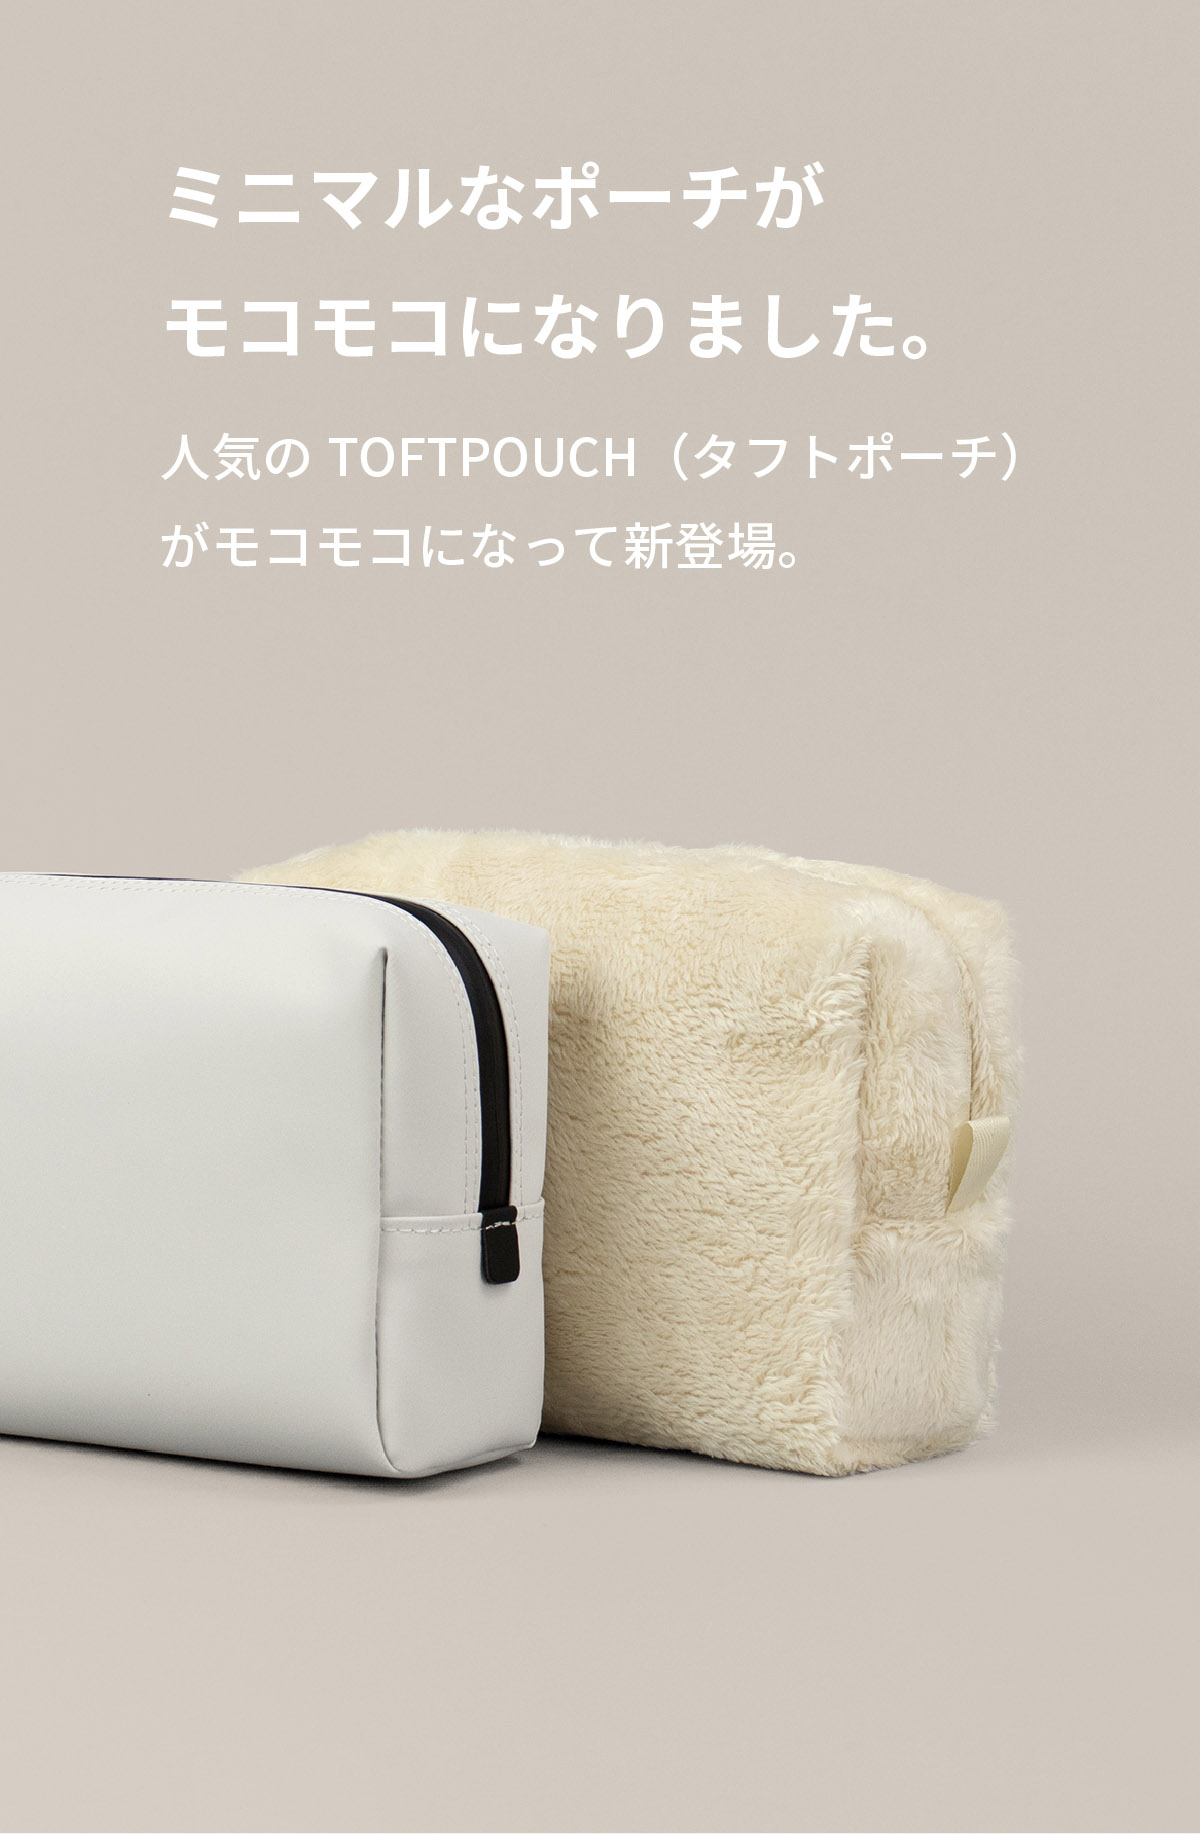 Fluff Pouch（フラッフポーチ）Lサイズ 化粧品 コスメポーチ メンズ 小物 ガジェット 送料無料 新生活 ギフト プレゼント プチギフト｜asoboze｜04